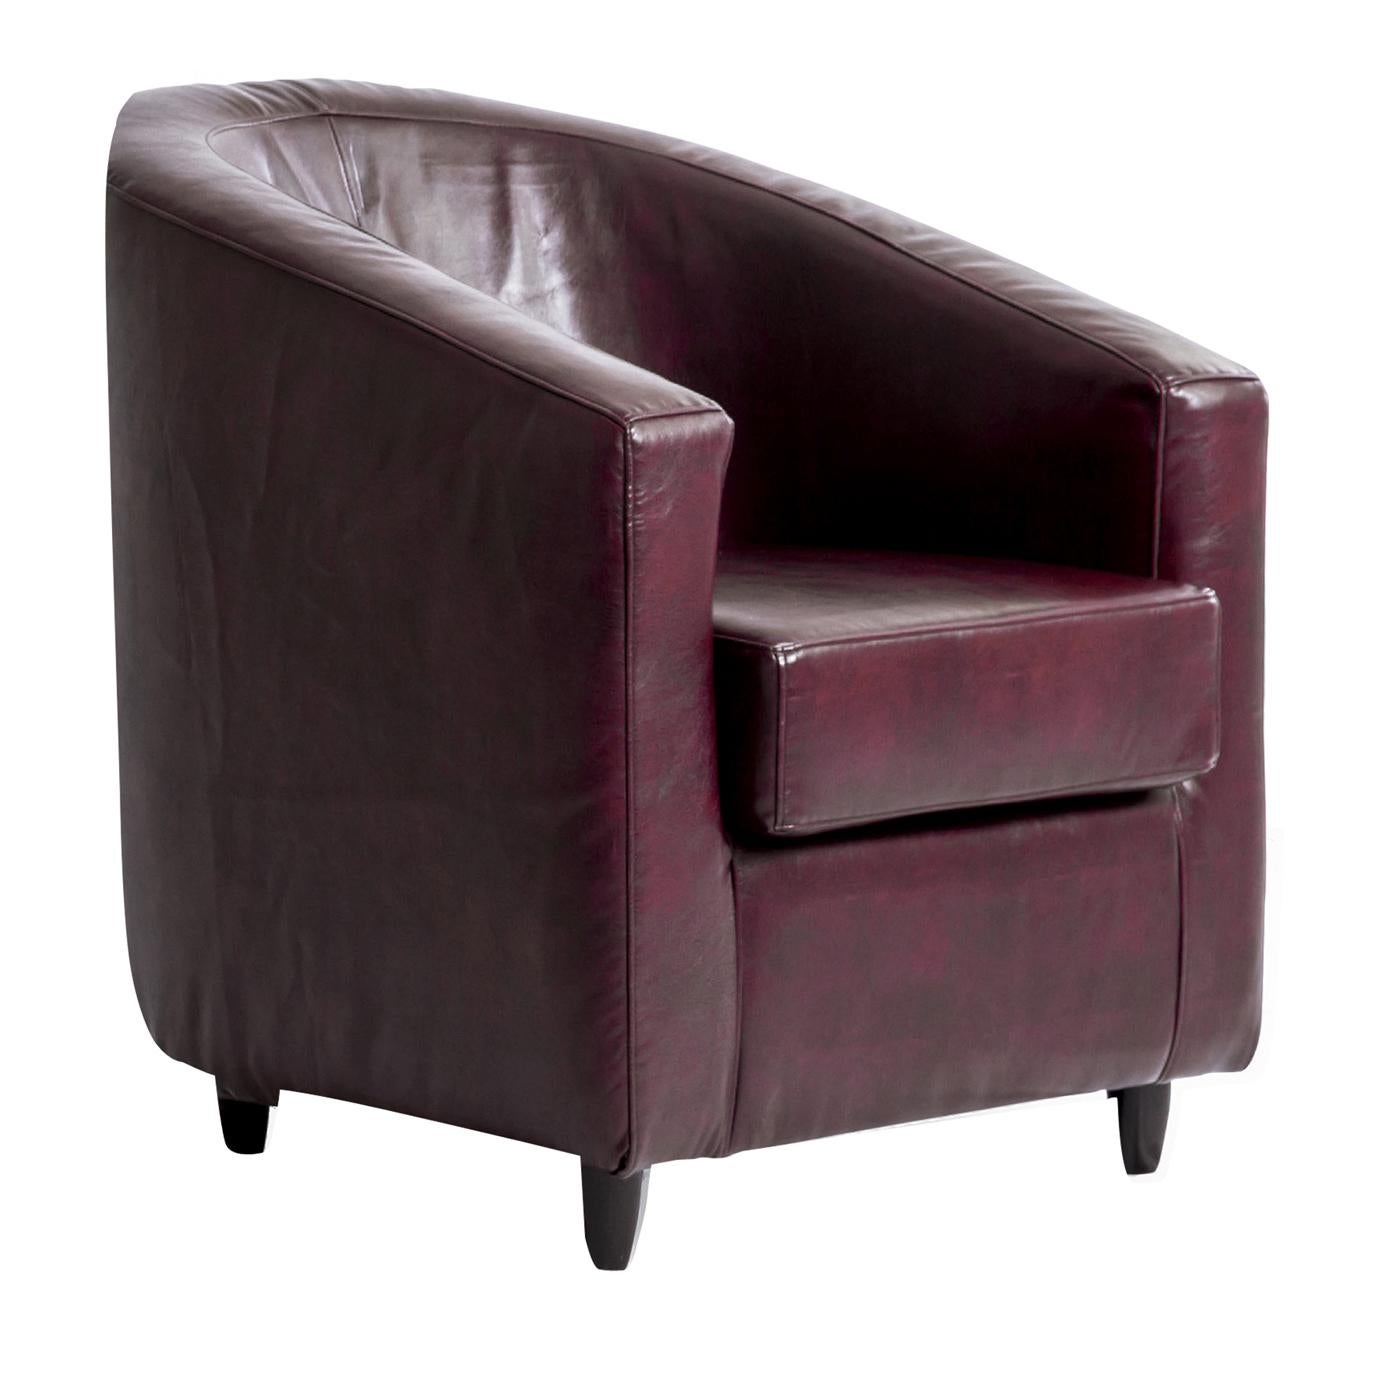 Stunning in its simplicity, this armchair adds a touch of elegance and comfort to a lounge room, private studio or guest room in a modern or classic style home. Comfortable, embracing, the armchair from the Contemporary collection is padded and